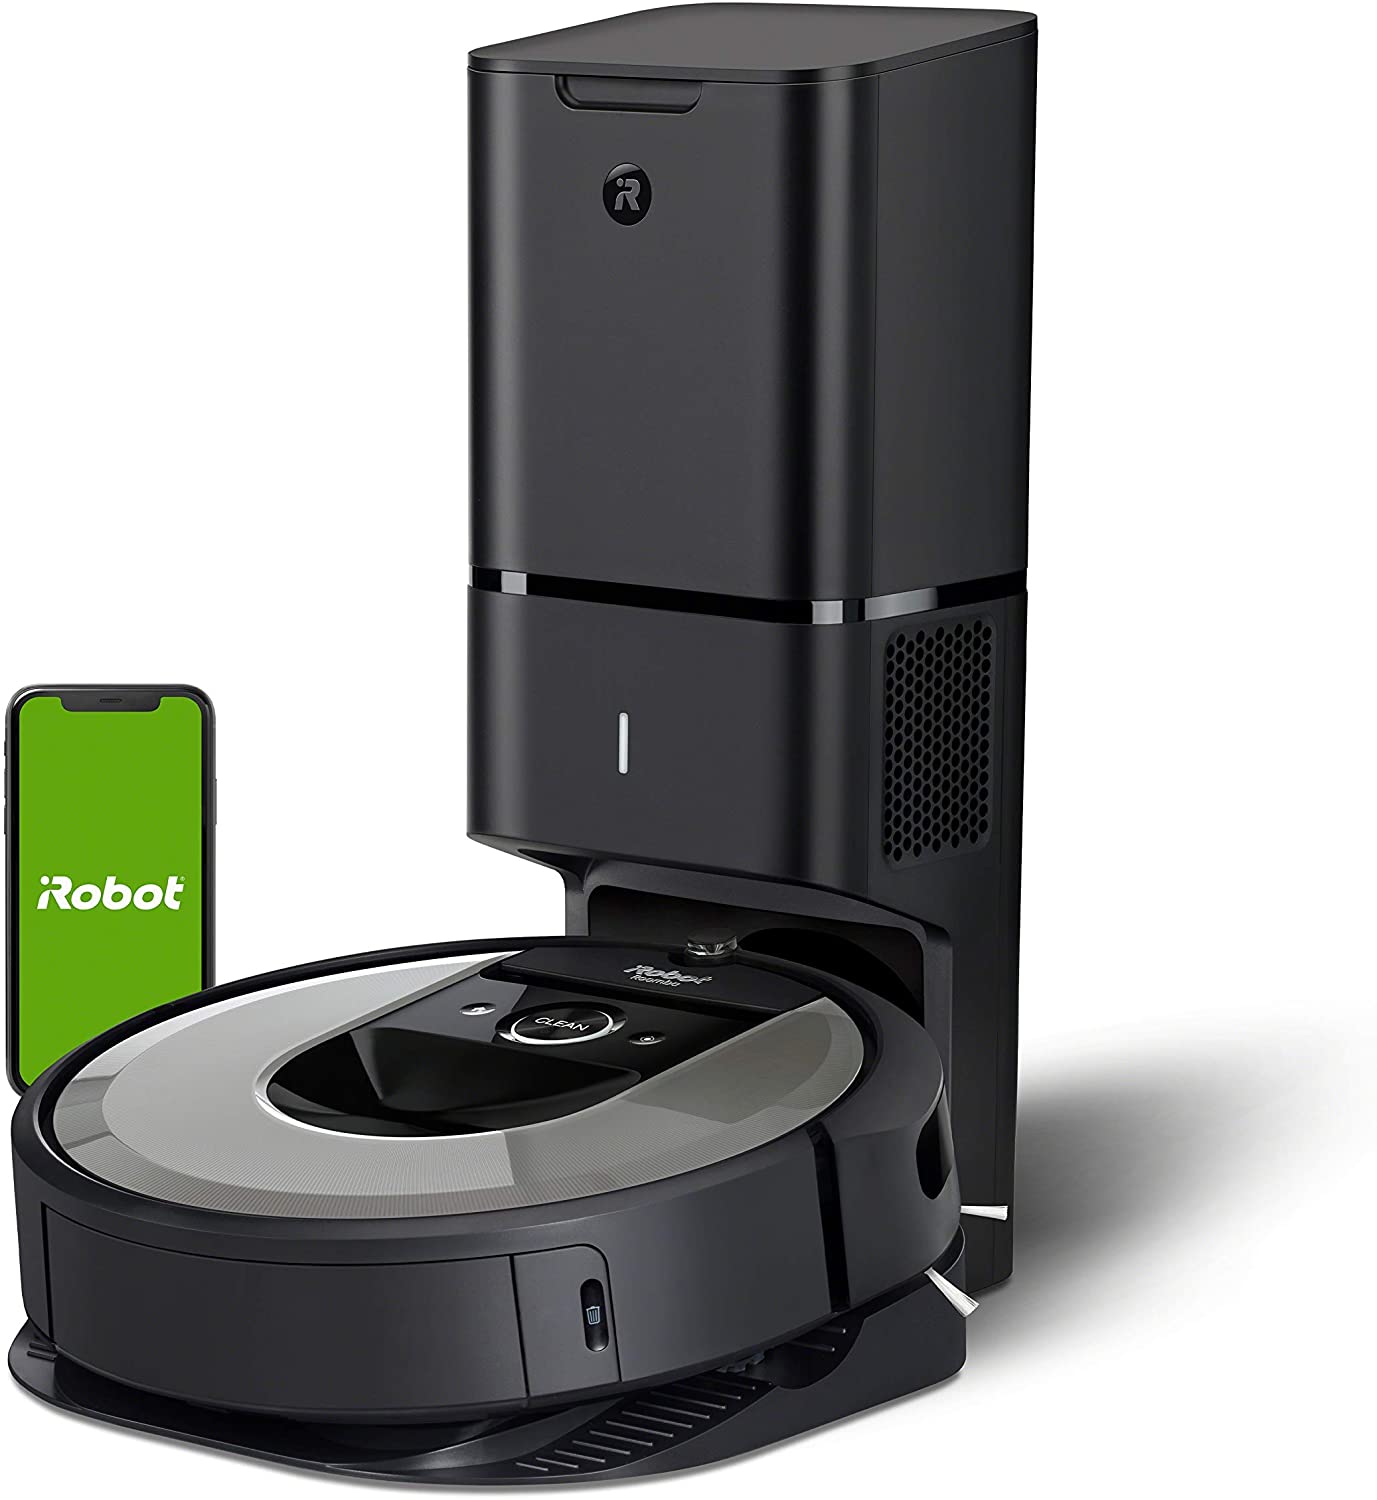 iRobot Roomba i6+ (6550) Robot Vacuum with Automatic Dirt Disposal-Empties Itself, Wi-Fi Connected, Works with Alexa, Carpets, + Smart Mapping Upgrade - Clean & Schedule by Room - image 1 of 3